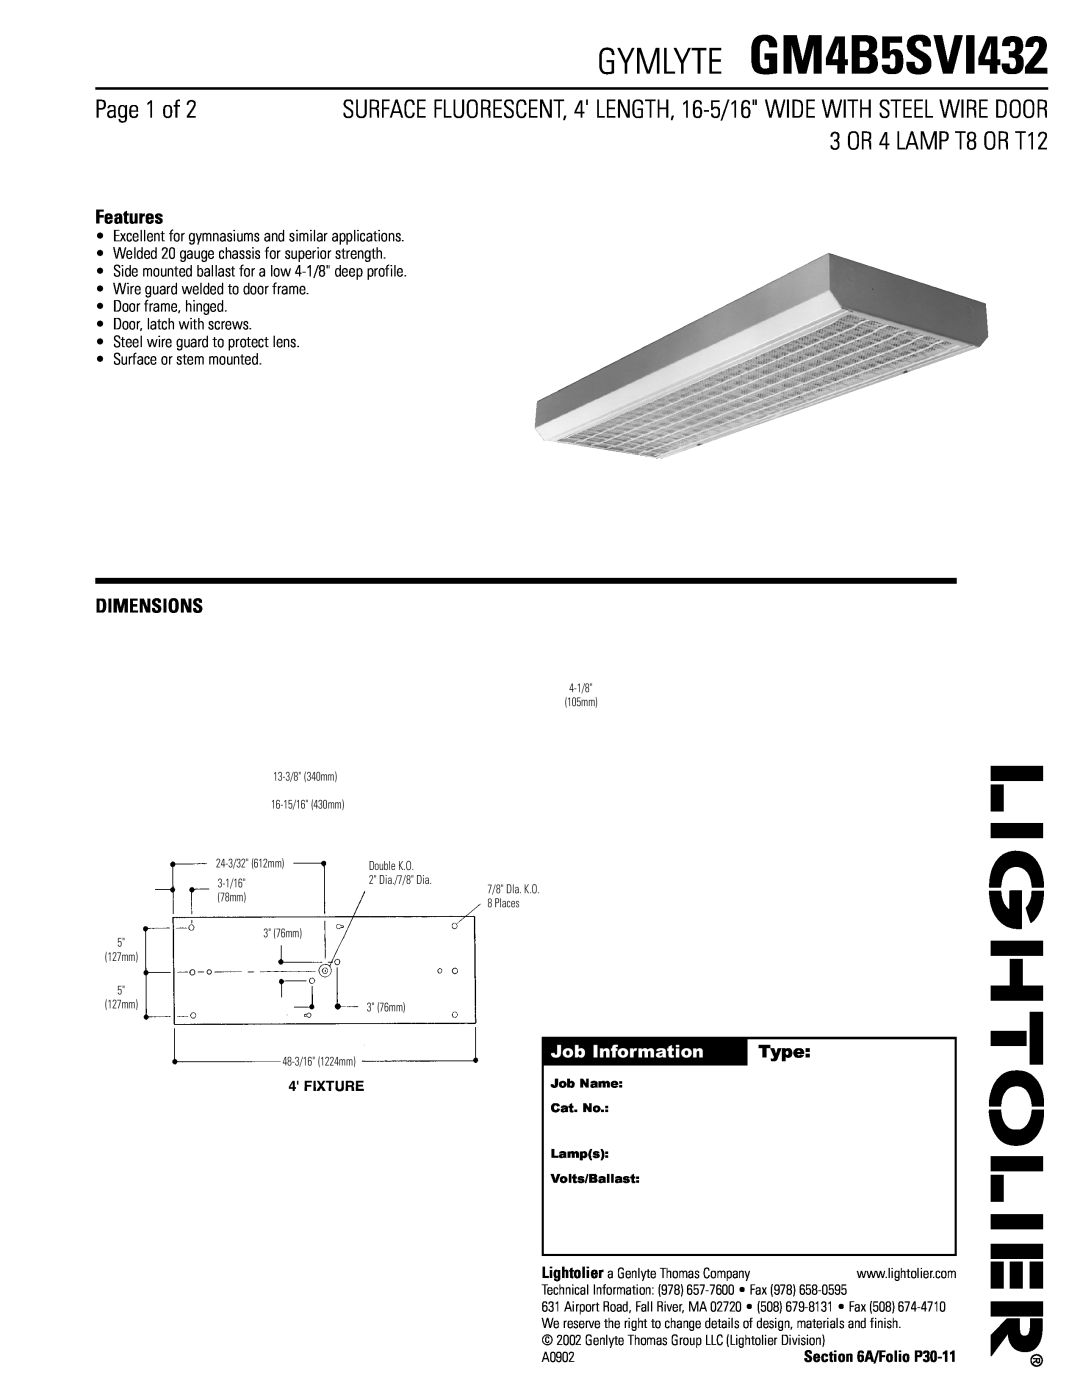 Lightolier dimensions GYMLYTE GM4B5SVI432, Page 1 of, 3 OR 4 LAMP T8 OR T12, Features, Dimensions, Job Information 